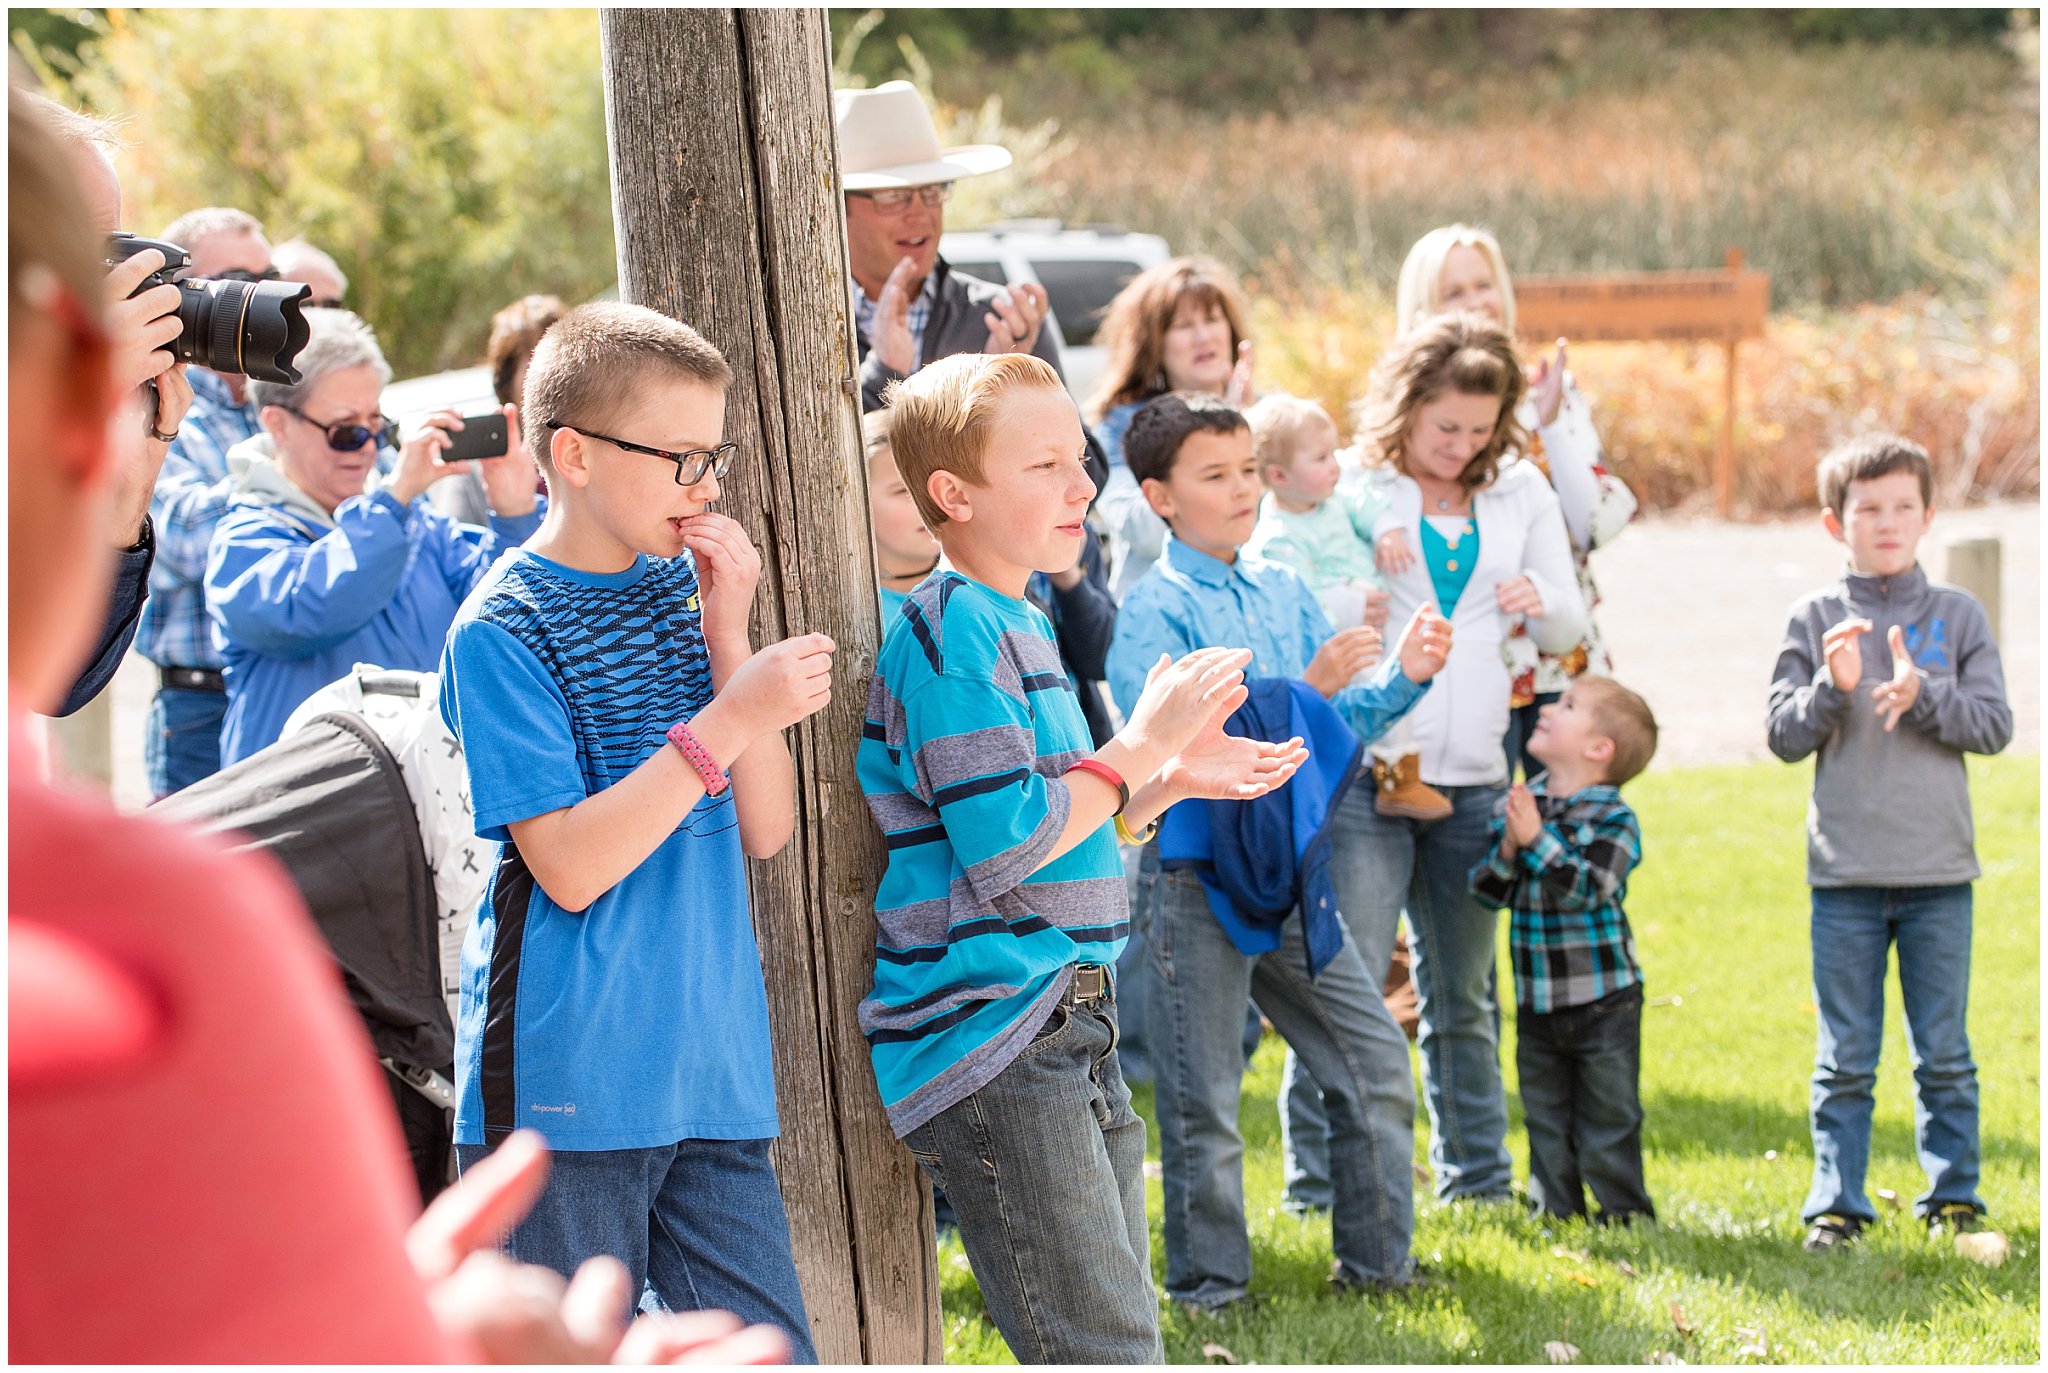 Family cheering after wish is revealed | Tremonton Family Pictures and Make a Wish Event | Jessie and Dallin Photography